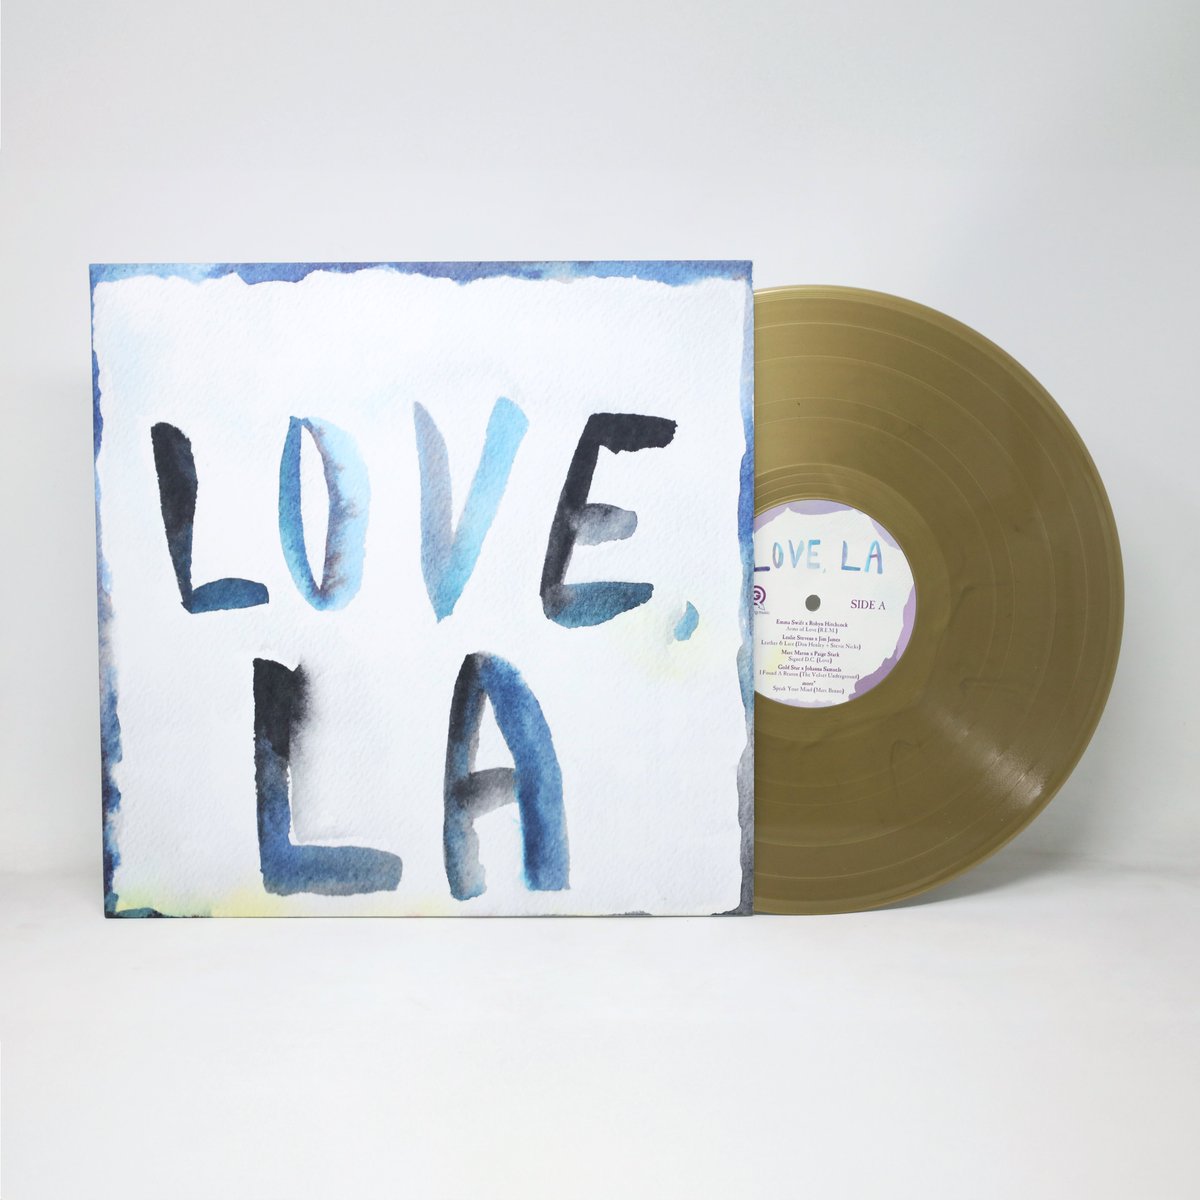 A love letter (compilation) from LA, benefiting the Fernando Pullum Community Art Center. Featuring @marcmaron, @tashaki_miyaki, @jimjames, @RobynHitchcock, @GoldstarLovesU + many more. Missed it on Saturday? You can still order from indie stores at rsdmrkt.com/item/661db648d…